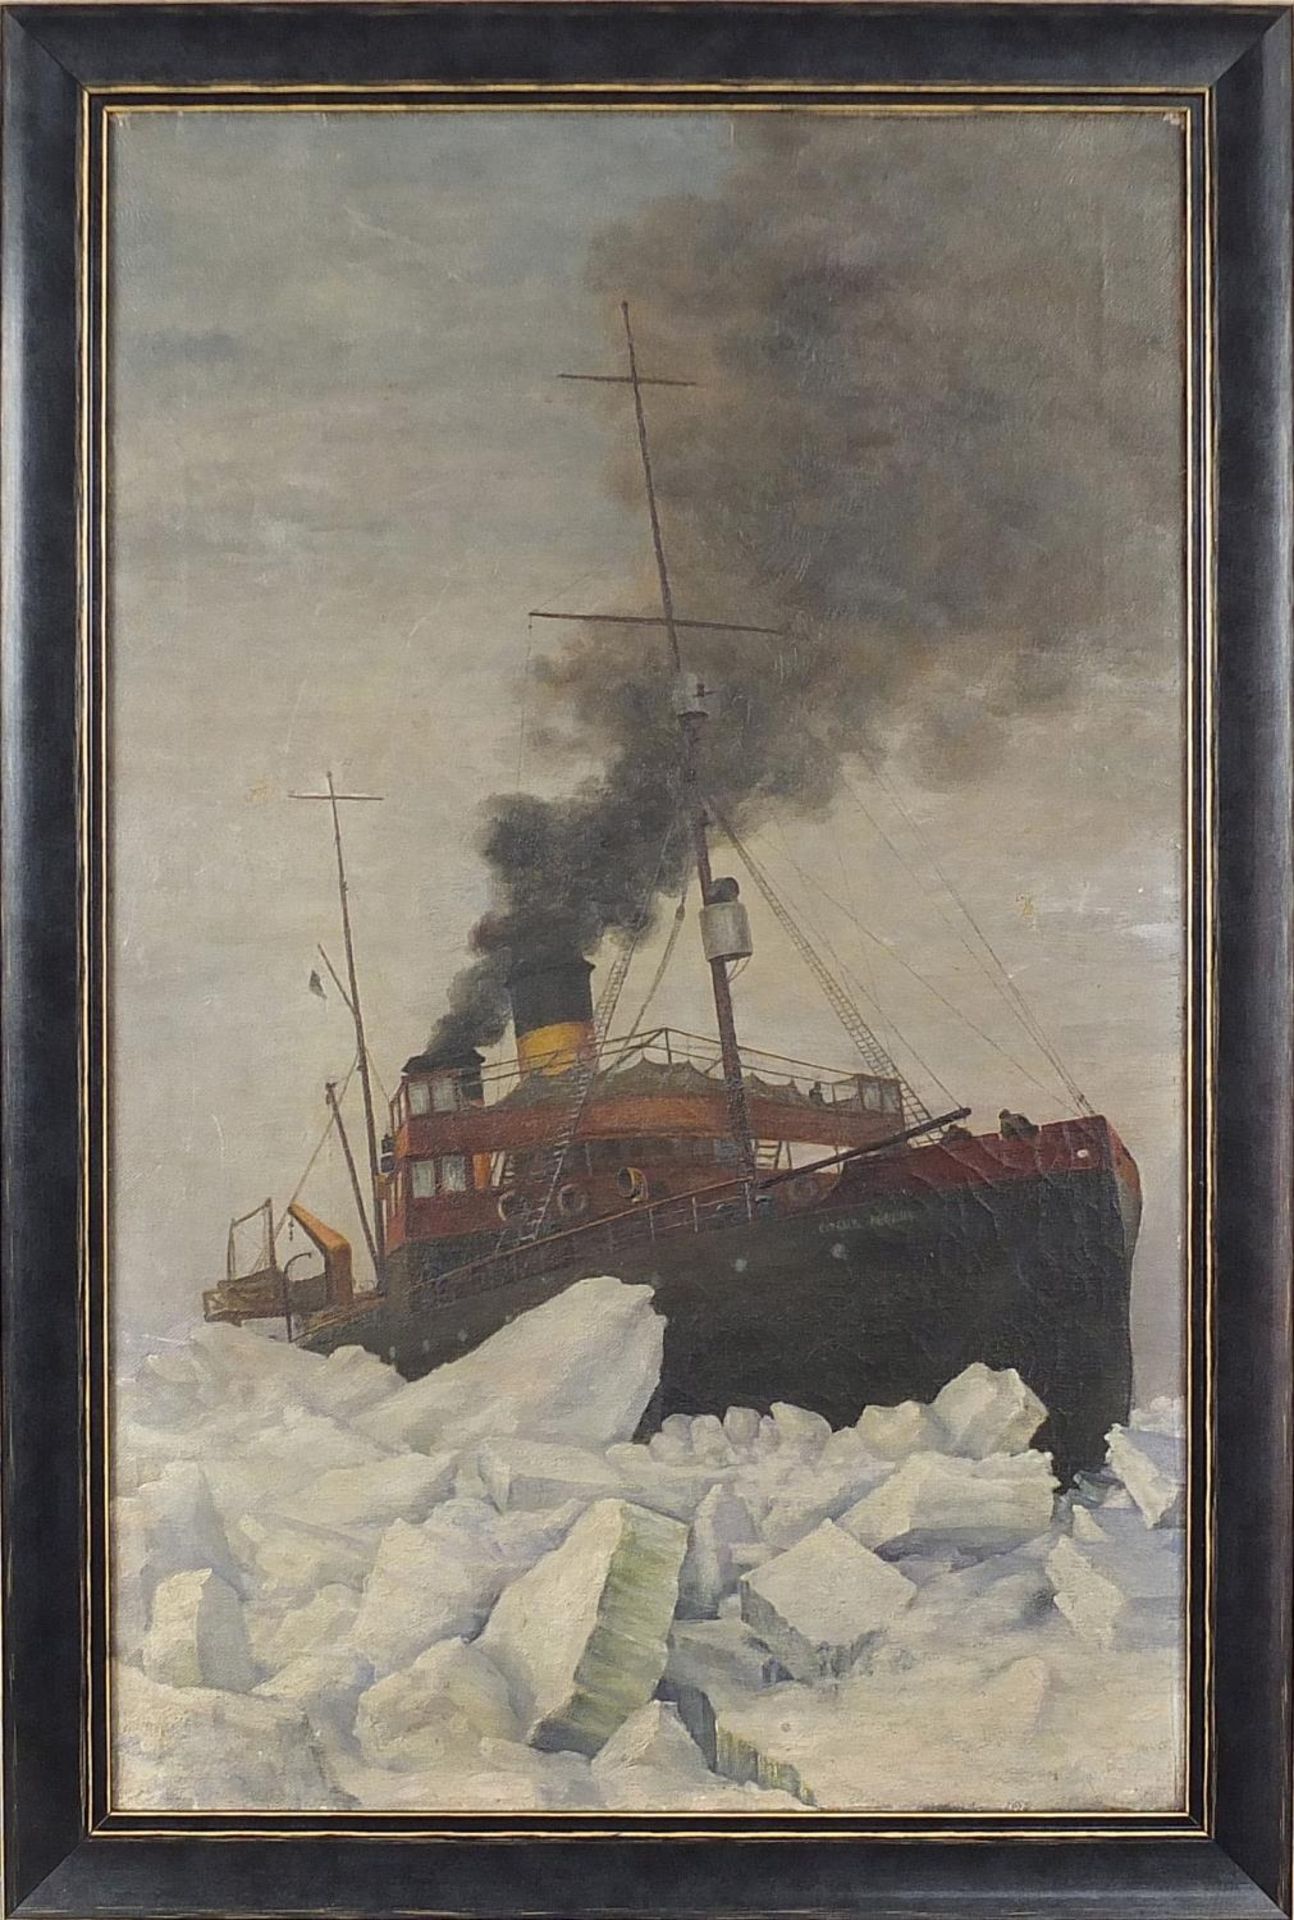 Russian ice breaker, 19th century century oil on canvas, Reeves & Sons stamp verso, mounted and - Image 3 of 10